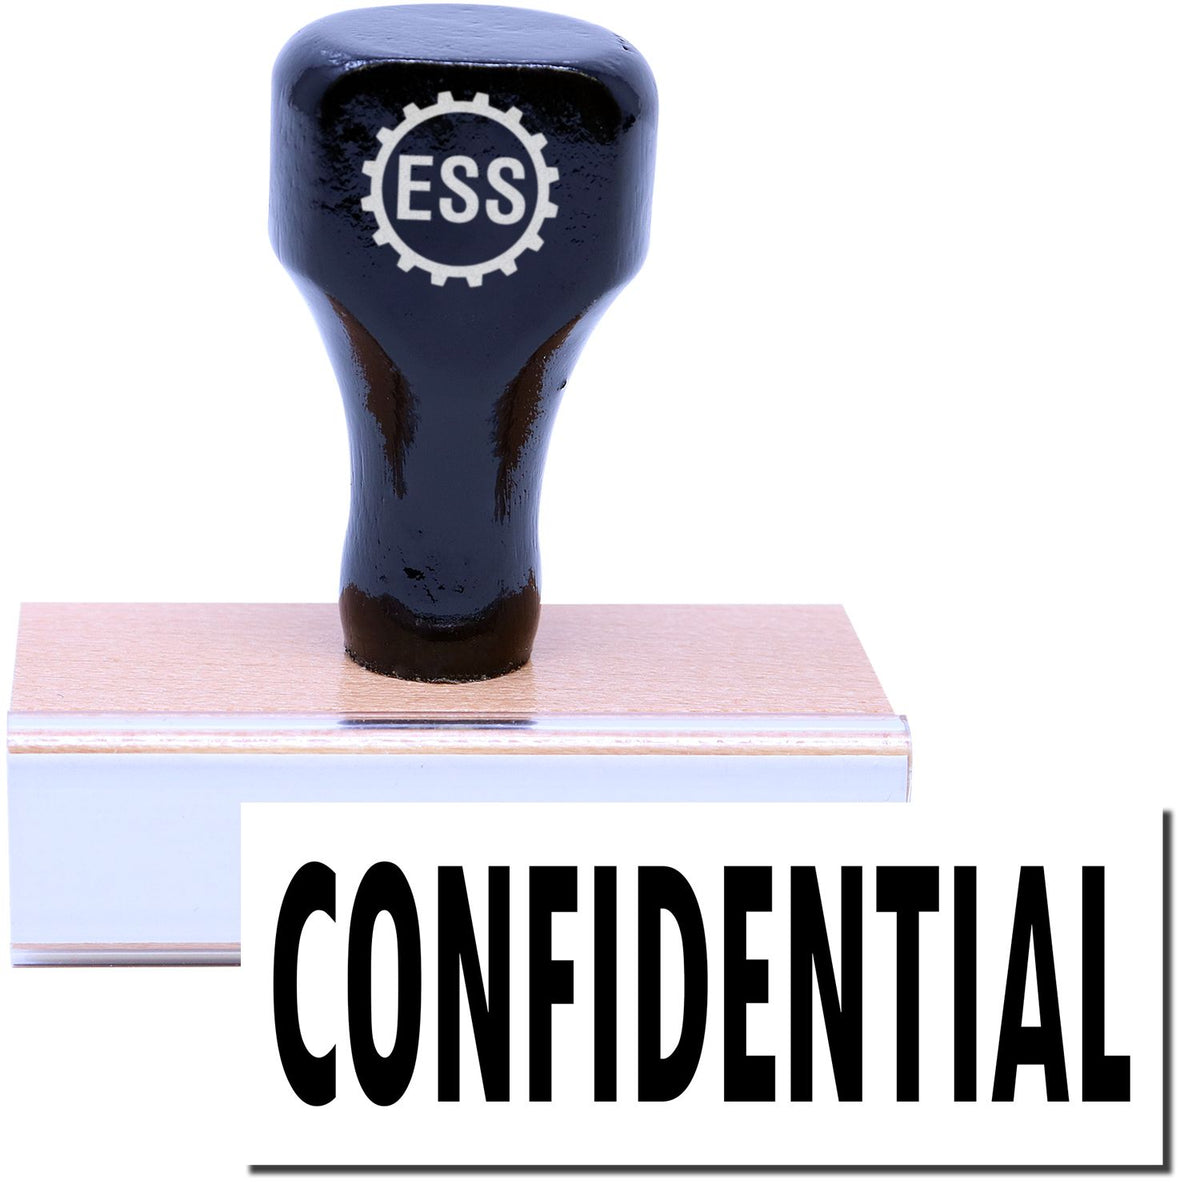 A stock office rubber stamp with a stamped image showing how the text &quot;CONFIDENTIAL&quot; in a large font is displayed after stamping.